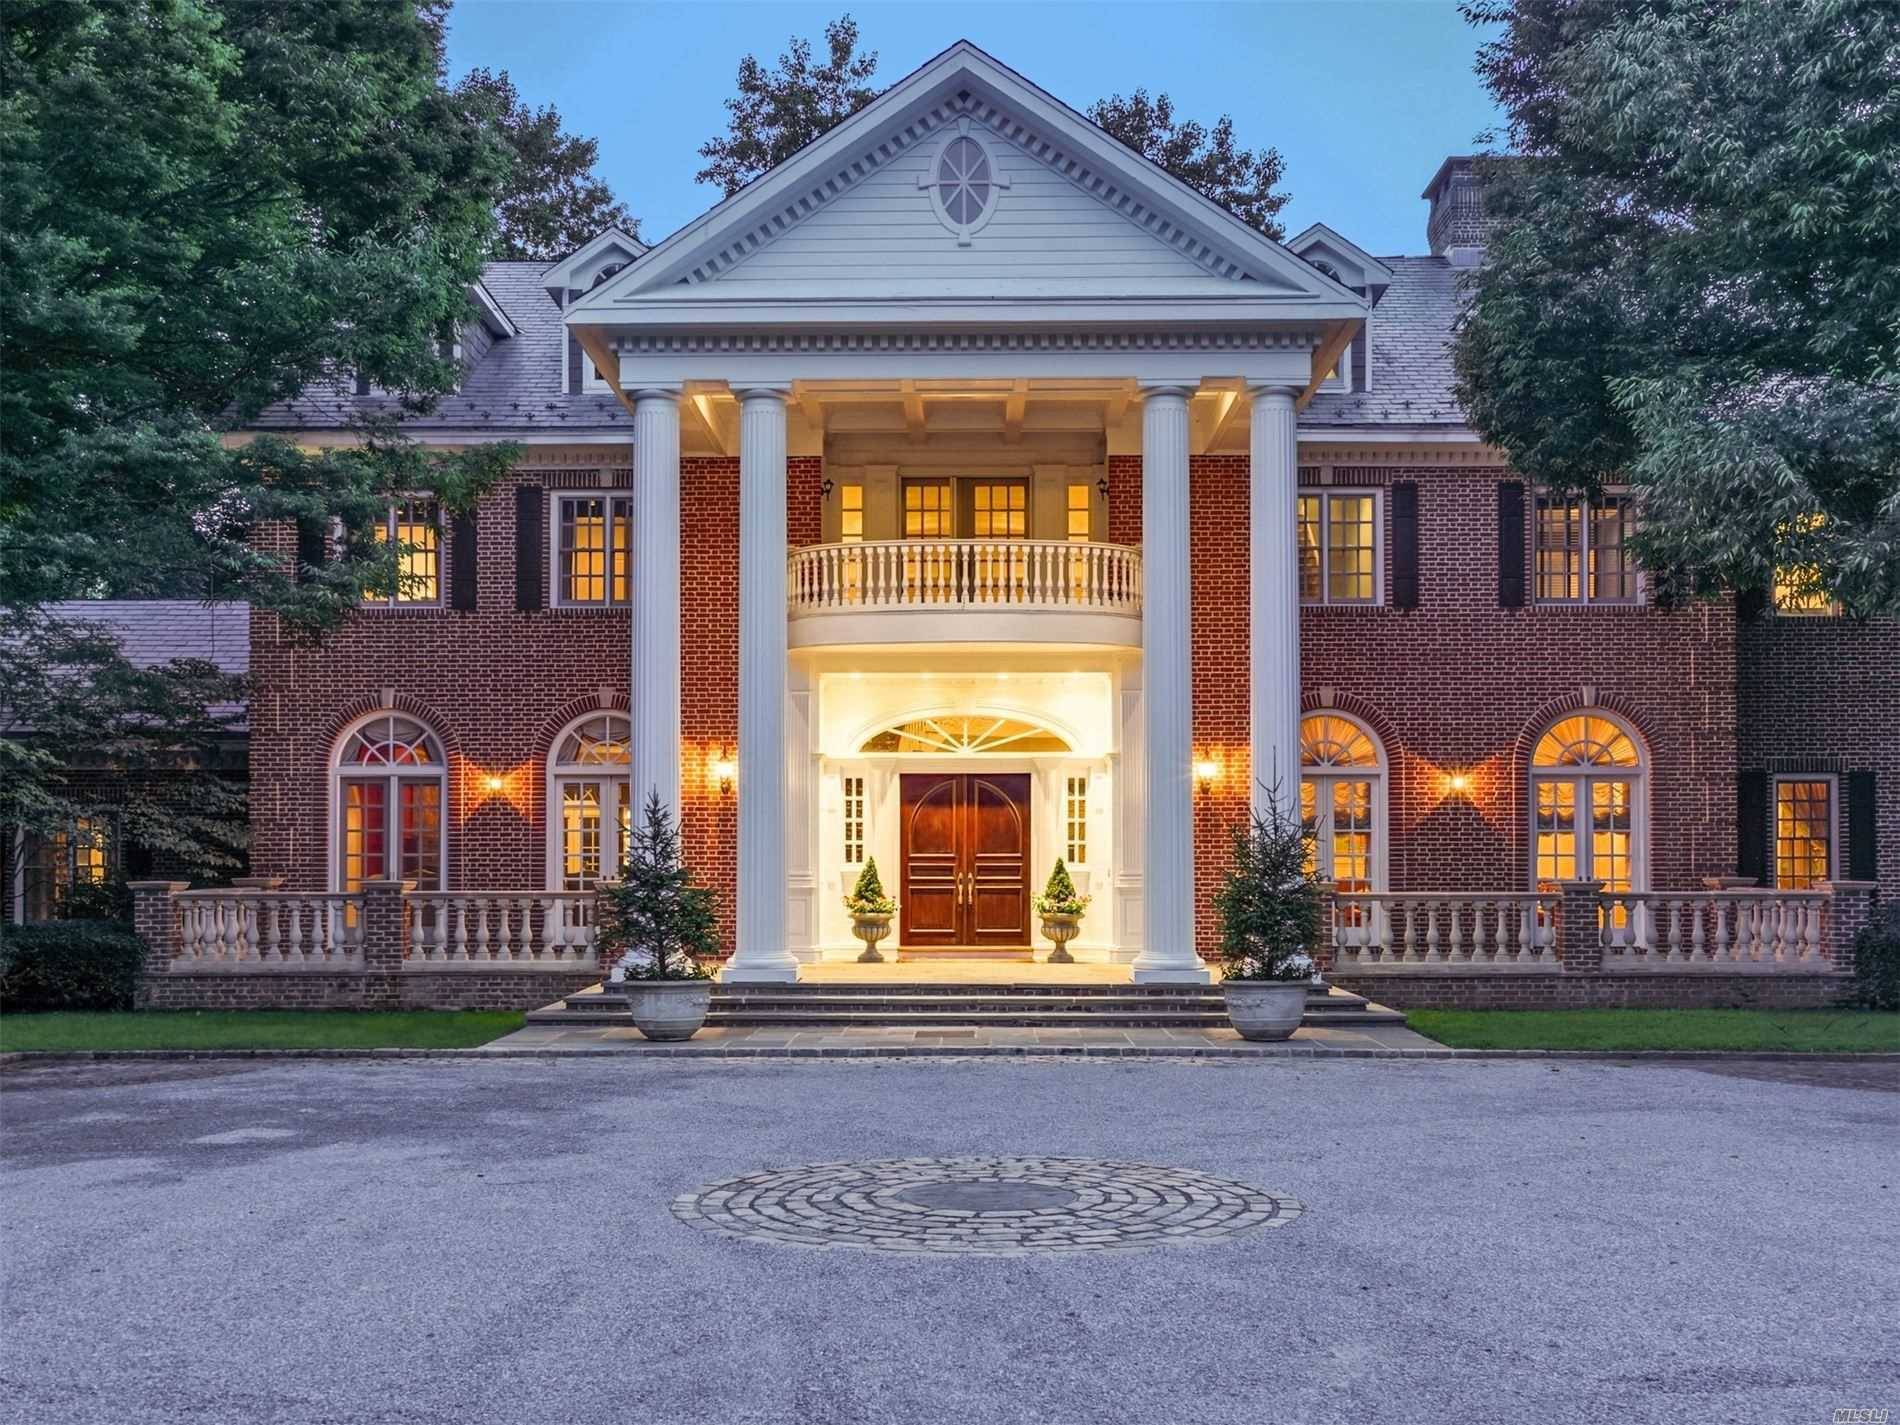 Stately Brick Manor Home on 4 arboretum like acres showcasing extensive architectural details 14, 000 sq.